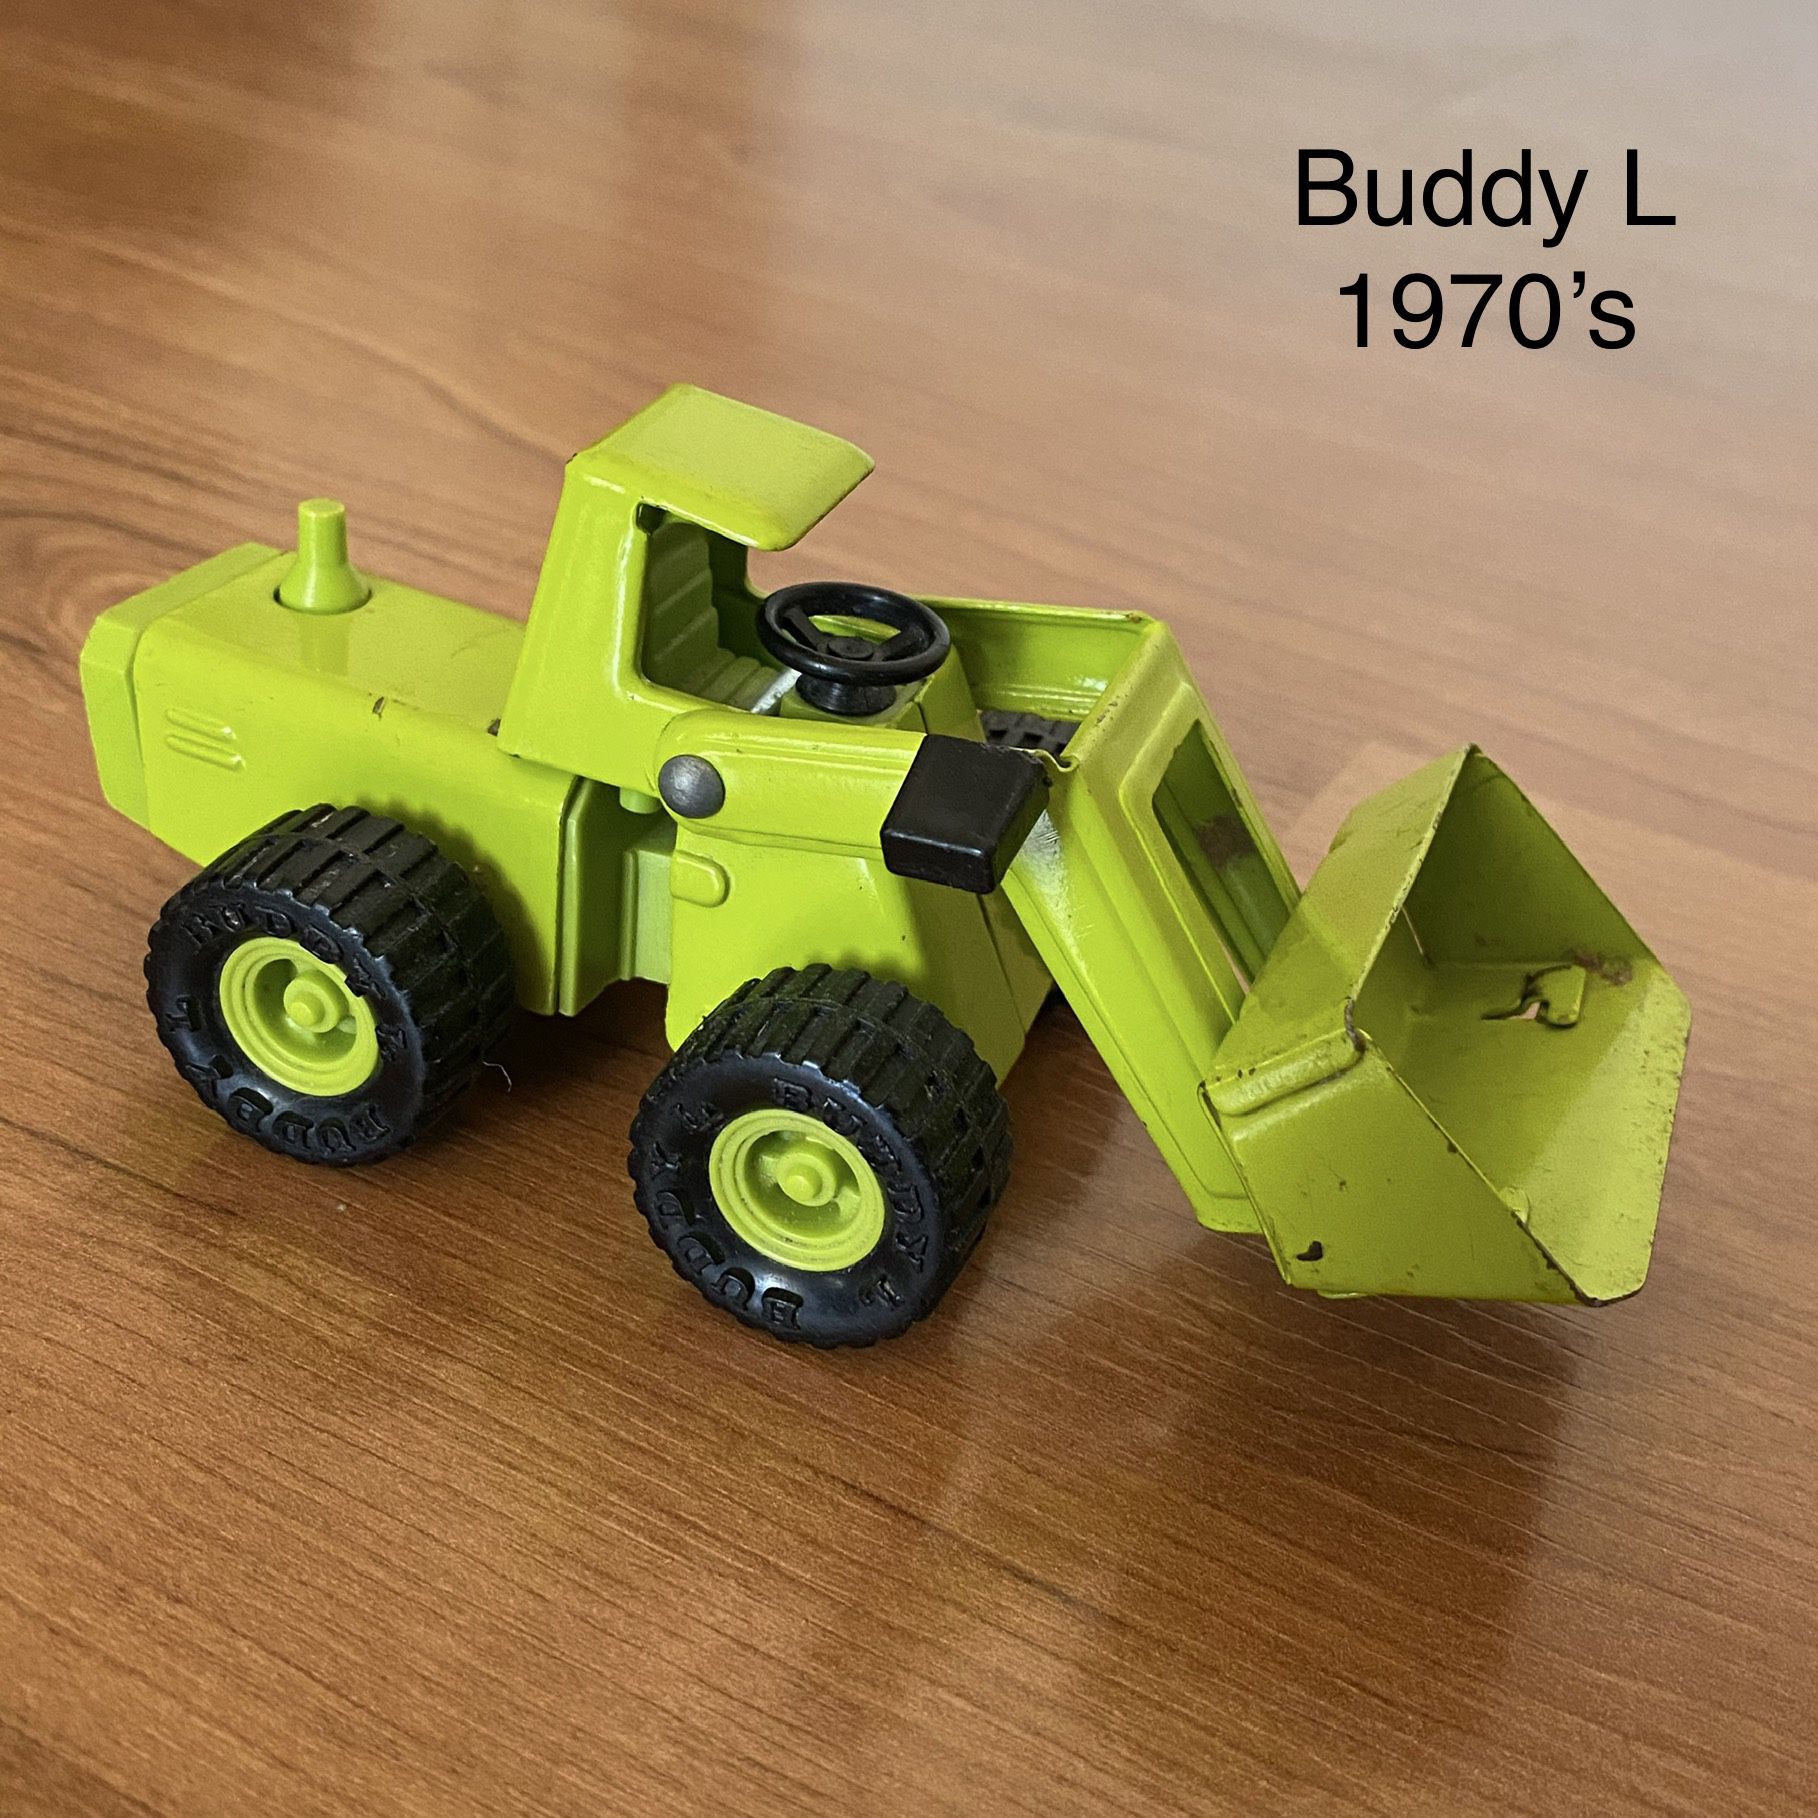 Vintage Collectible BUDDY L Lime Green Metal Bulldozer, Tractor Kids Toy From The 1970’s